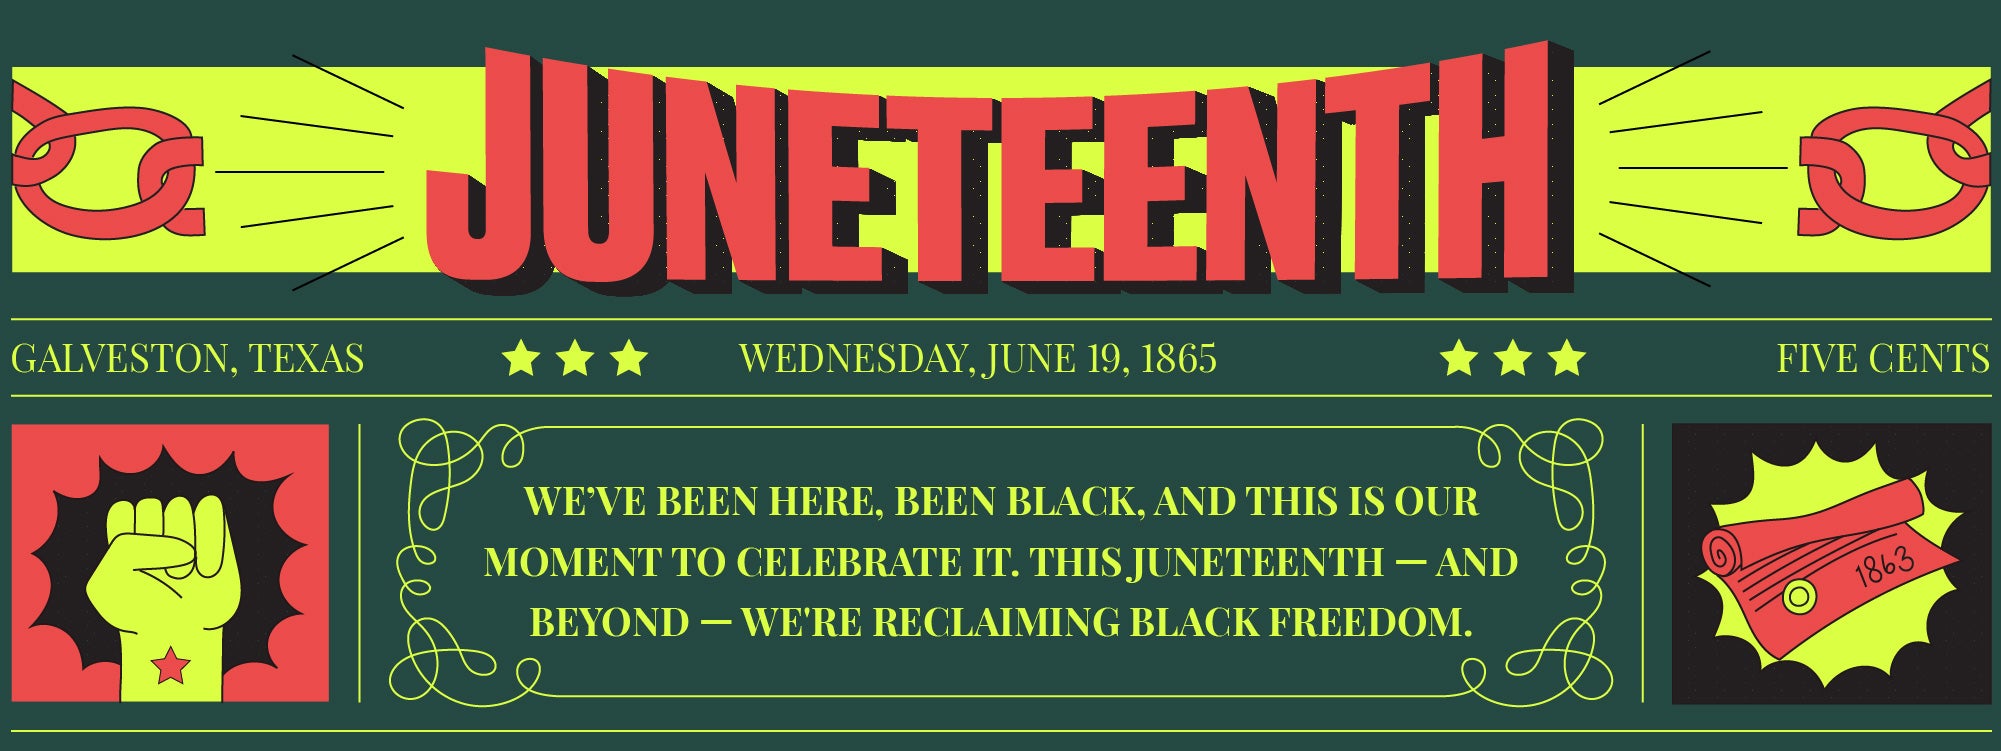 Juneteenth. We’ve been here, been Black, and this is our moment to celebrate it. This Juneteenth - and beyond - we’re reclaiming Black Freedom.